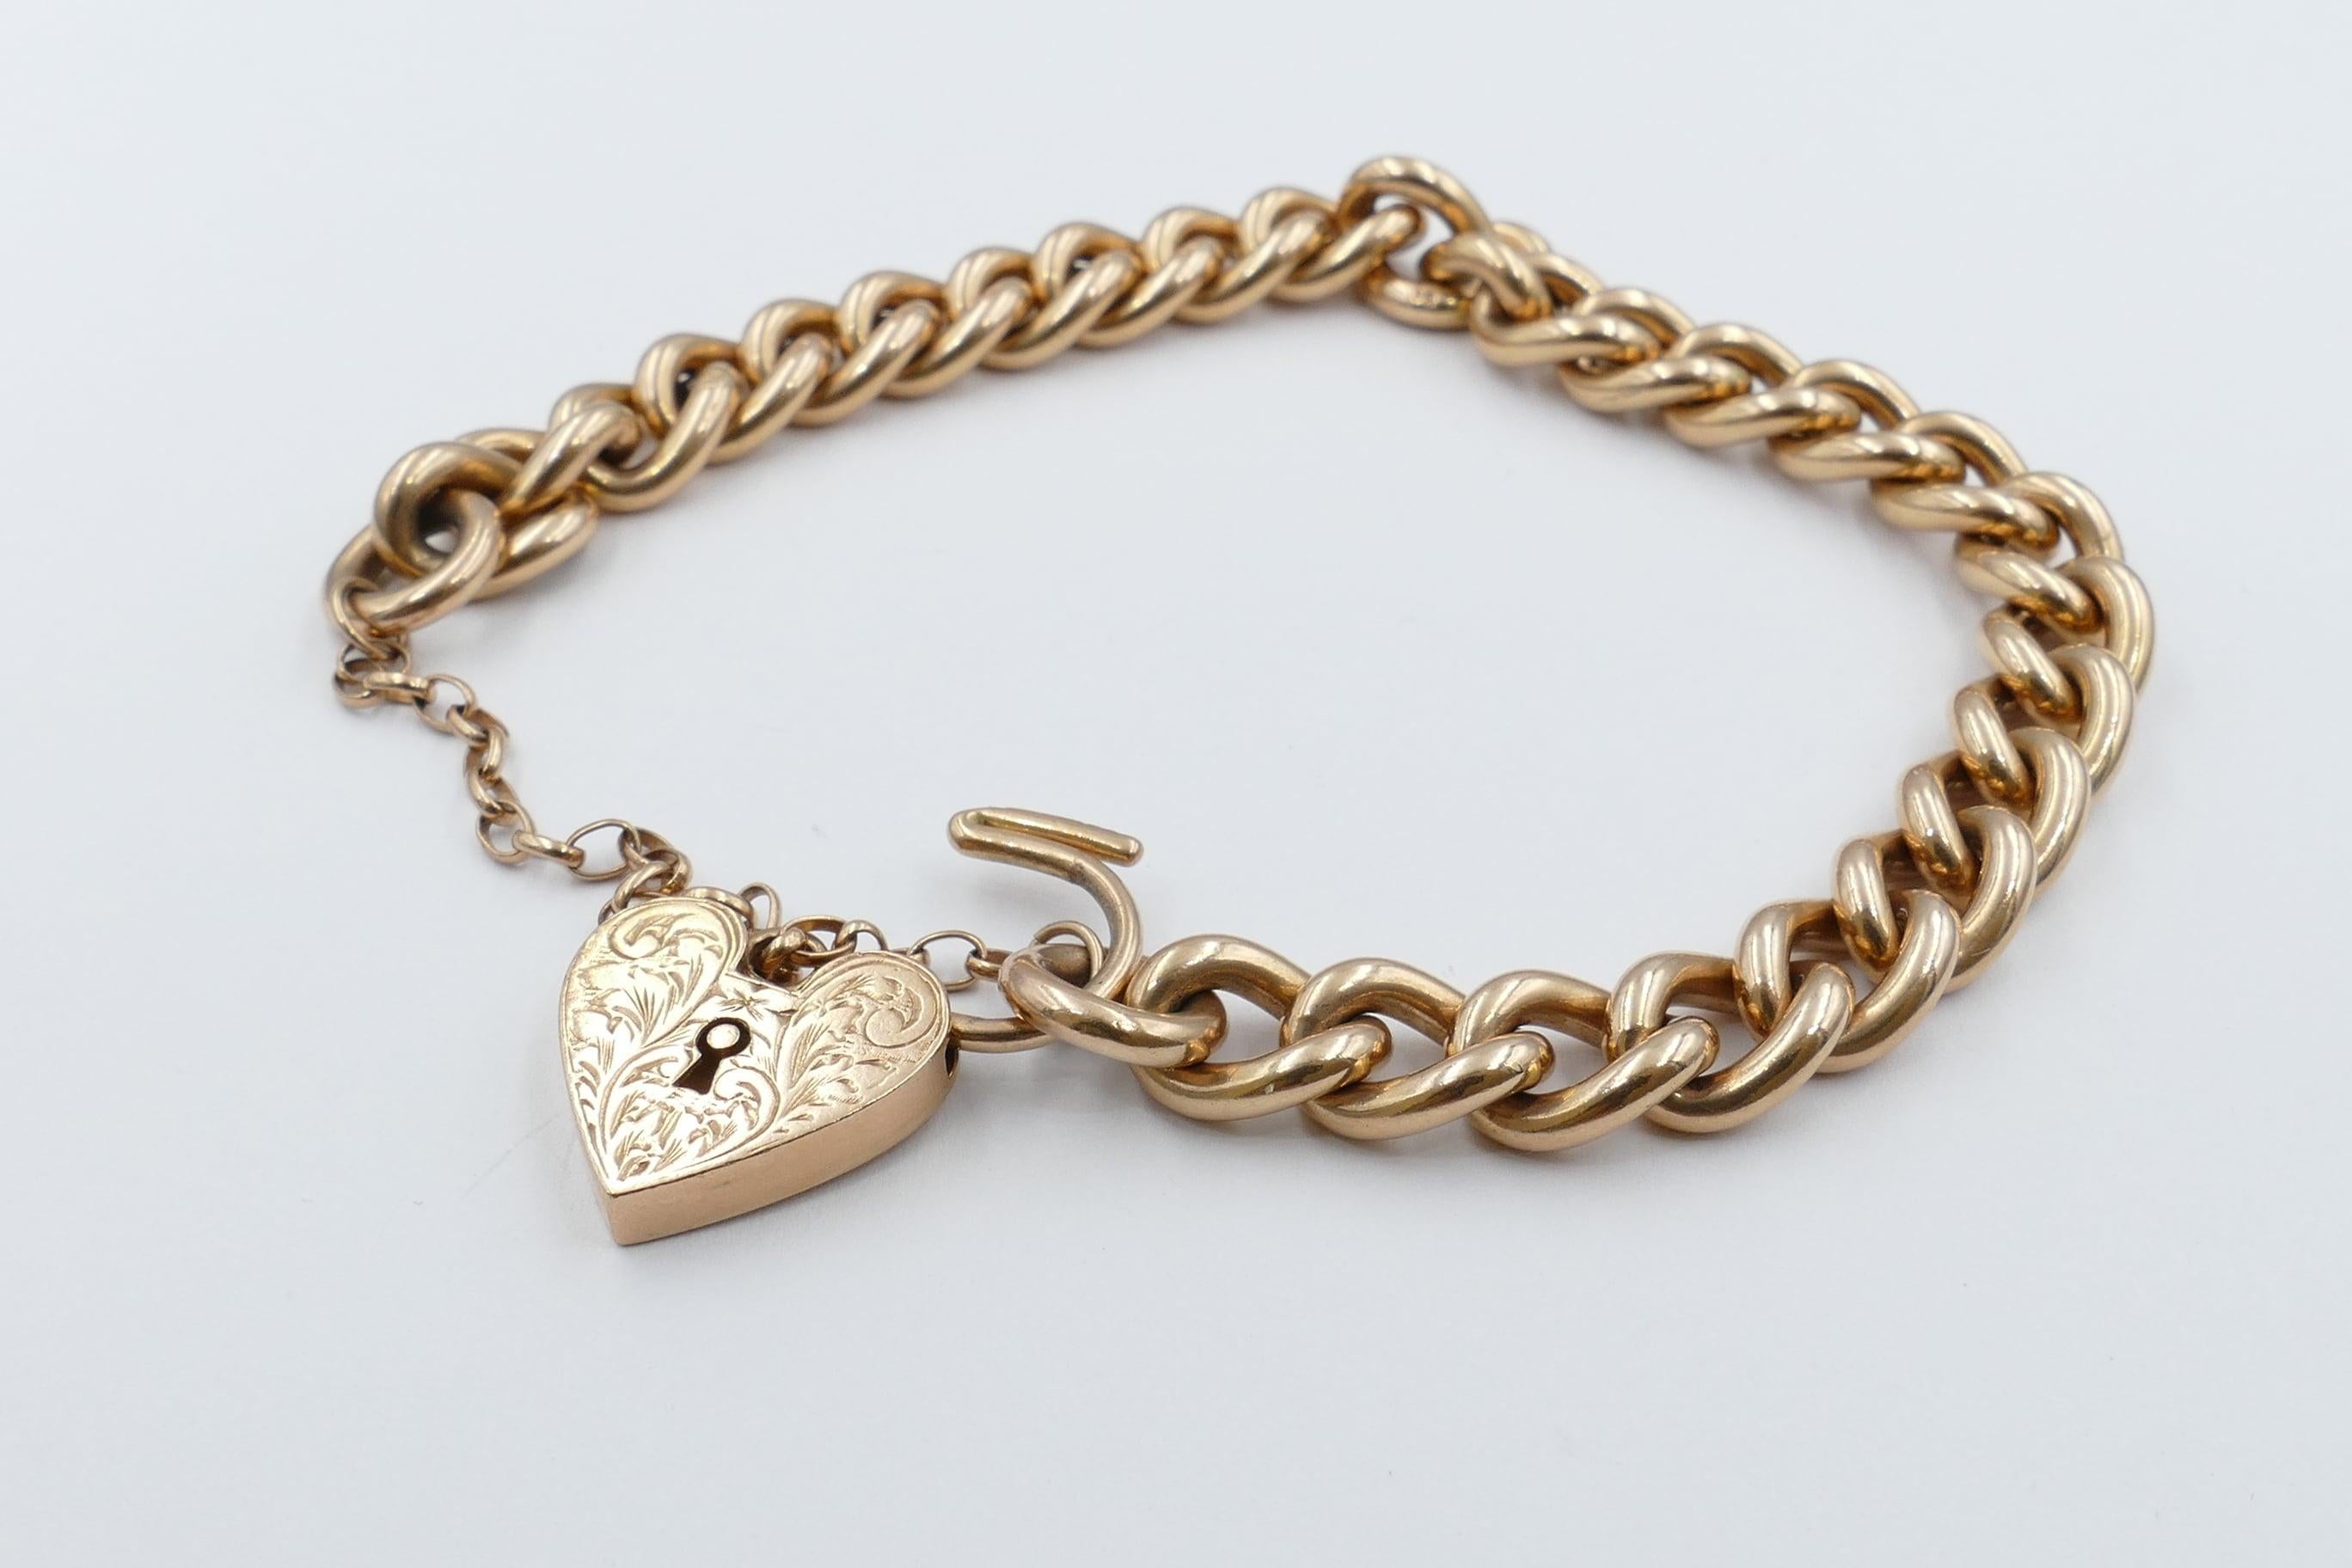 This lovely old 9ct Rose Gold Bracelet features a hallmark on each link and is in excellent condition.
Created in the late Art Deco period. 
The Bracelet measures 19cm X 8mm with a Heart Padlock and an oval safety chain and lock.
The Heart Locket is